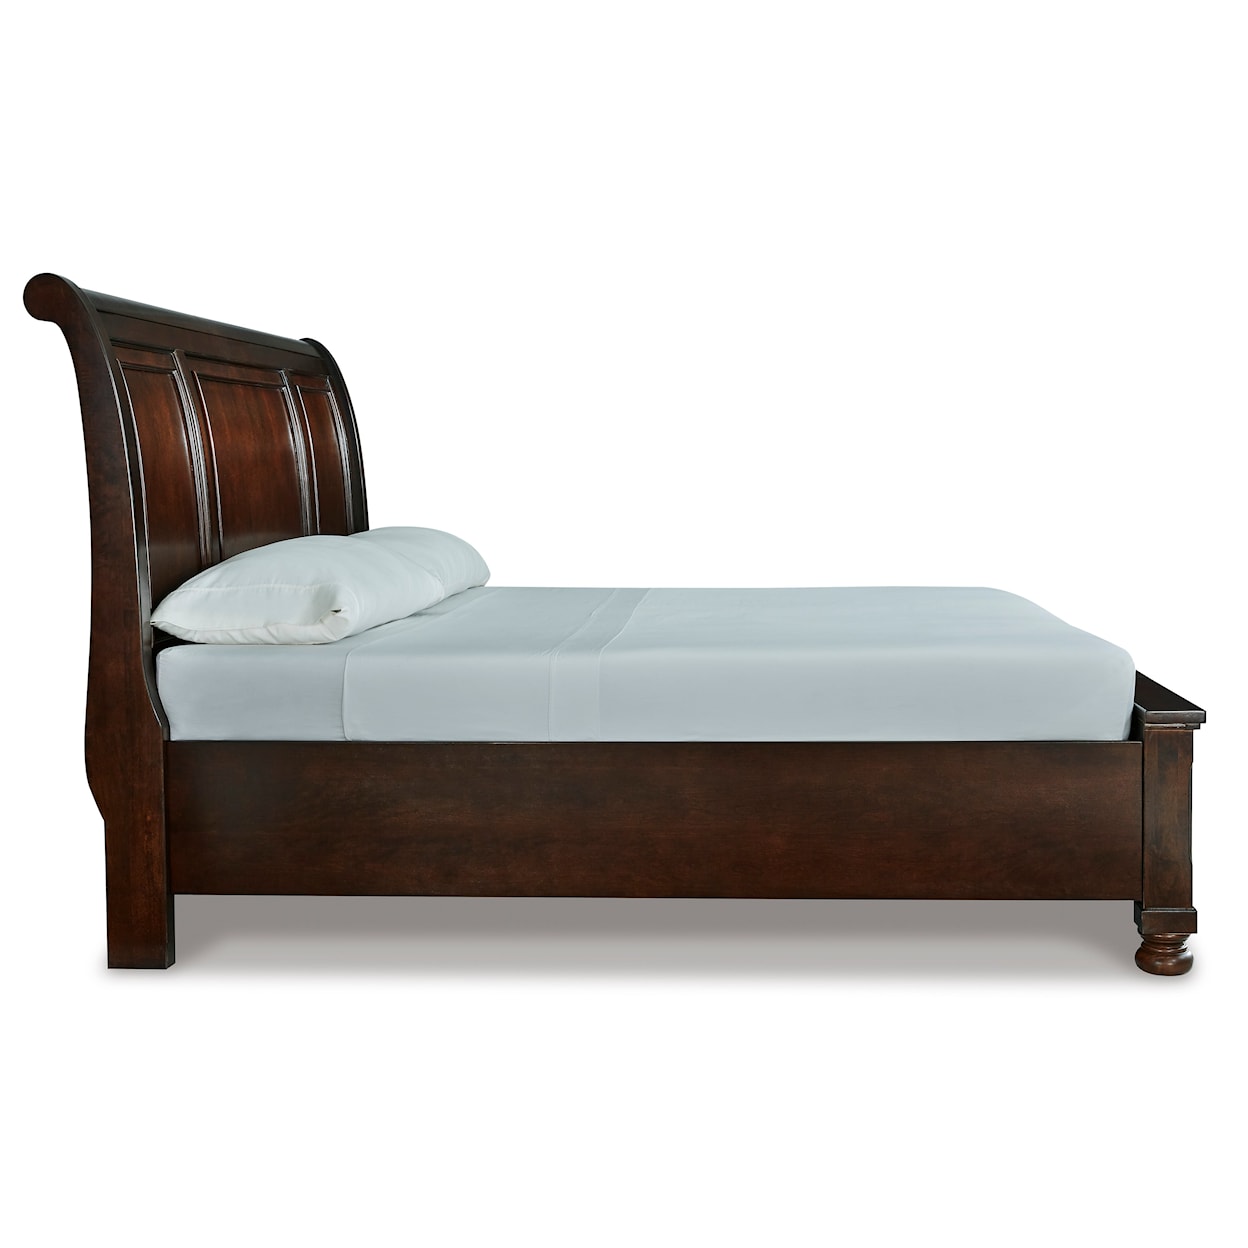 Signature Design by Ashley Furniture Porter King Sleigh Bed